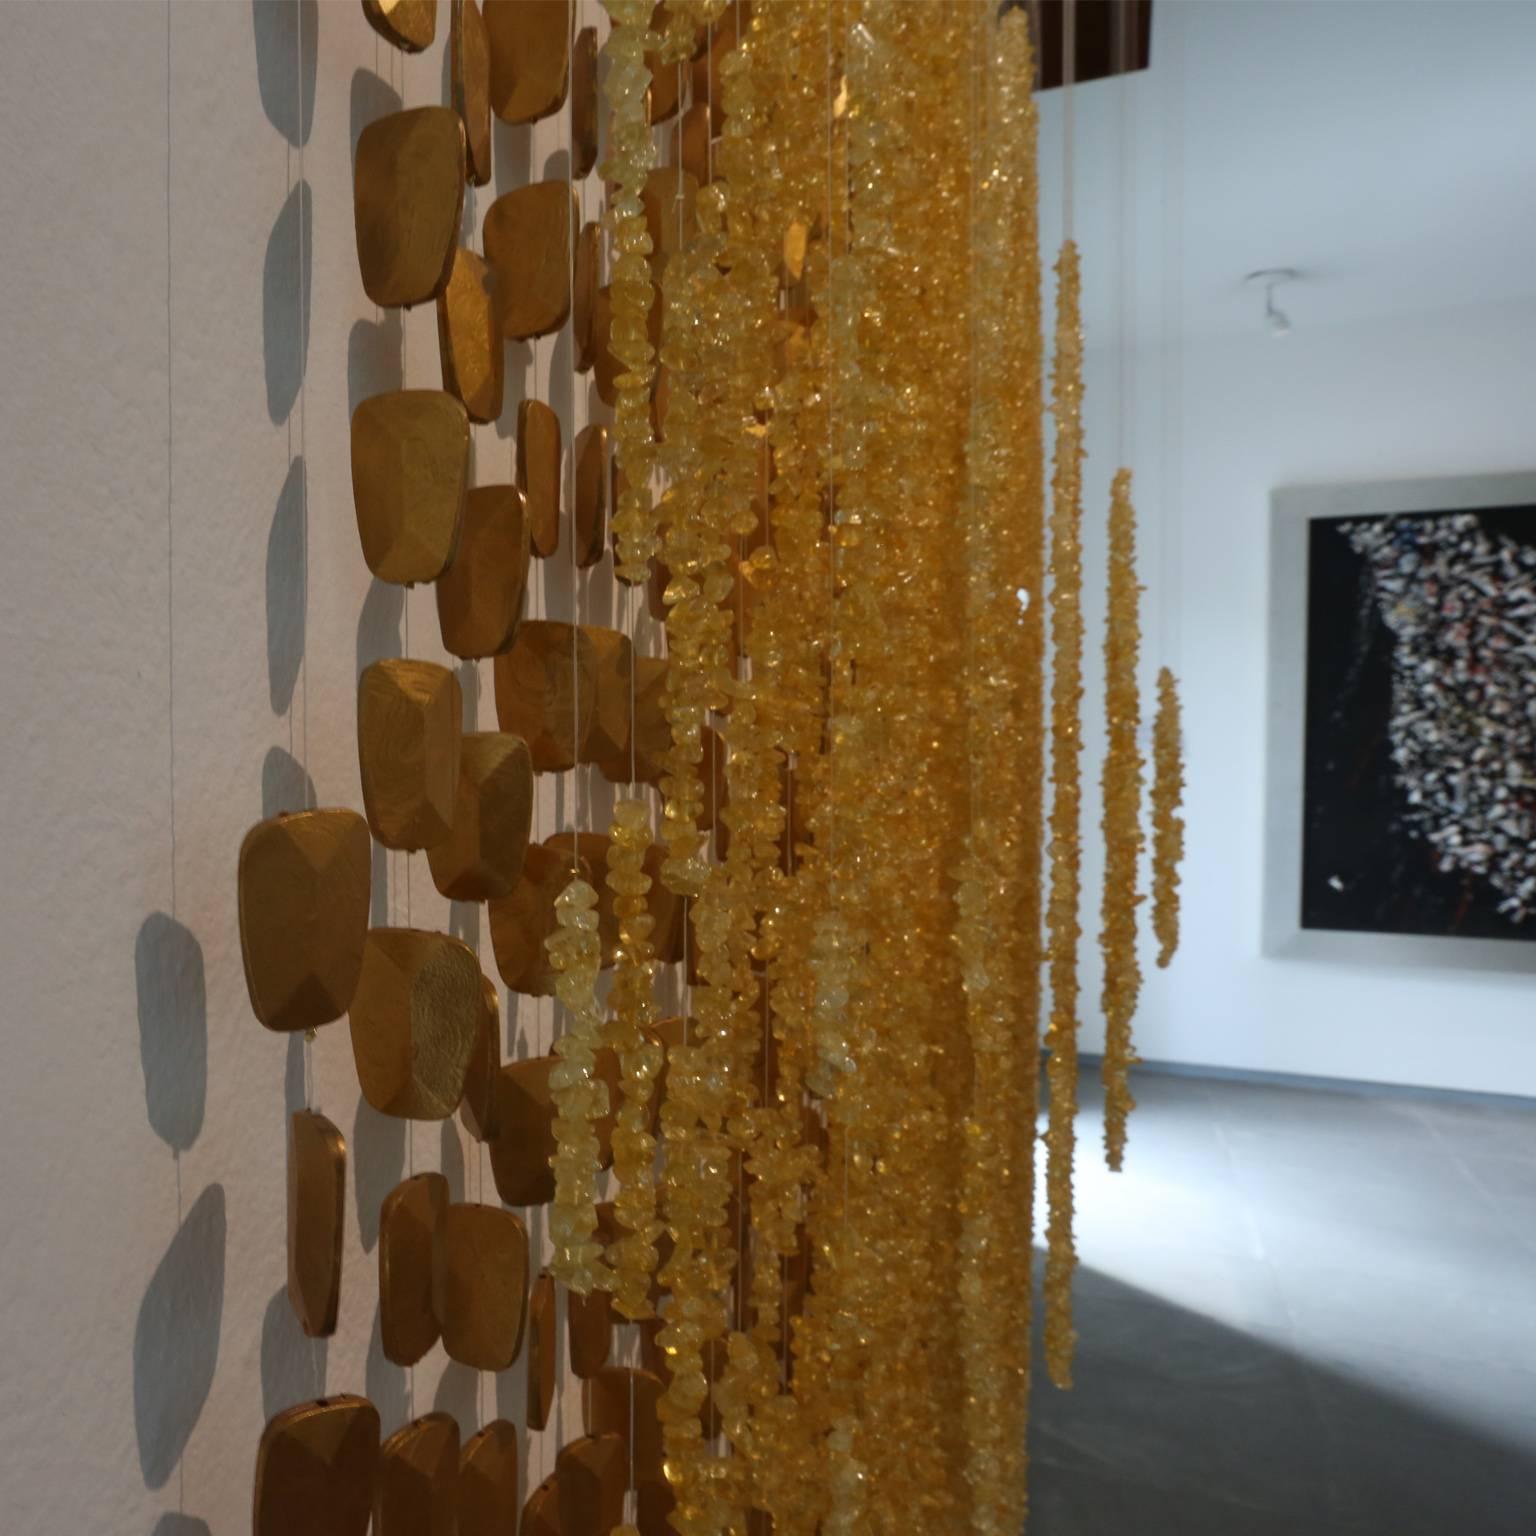 Mexican Handmade Contemporary Art

Elegant and shiny

This piece is all hand made in Mexico City. The 12,250 beads with a translucent amber finish were strung individually on threads and held with golden metal miniature cubes. The first suspended